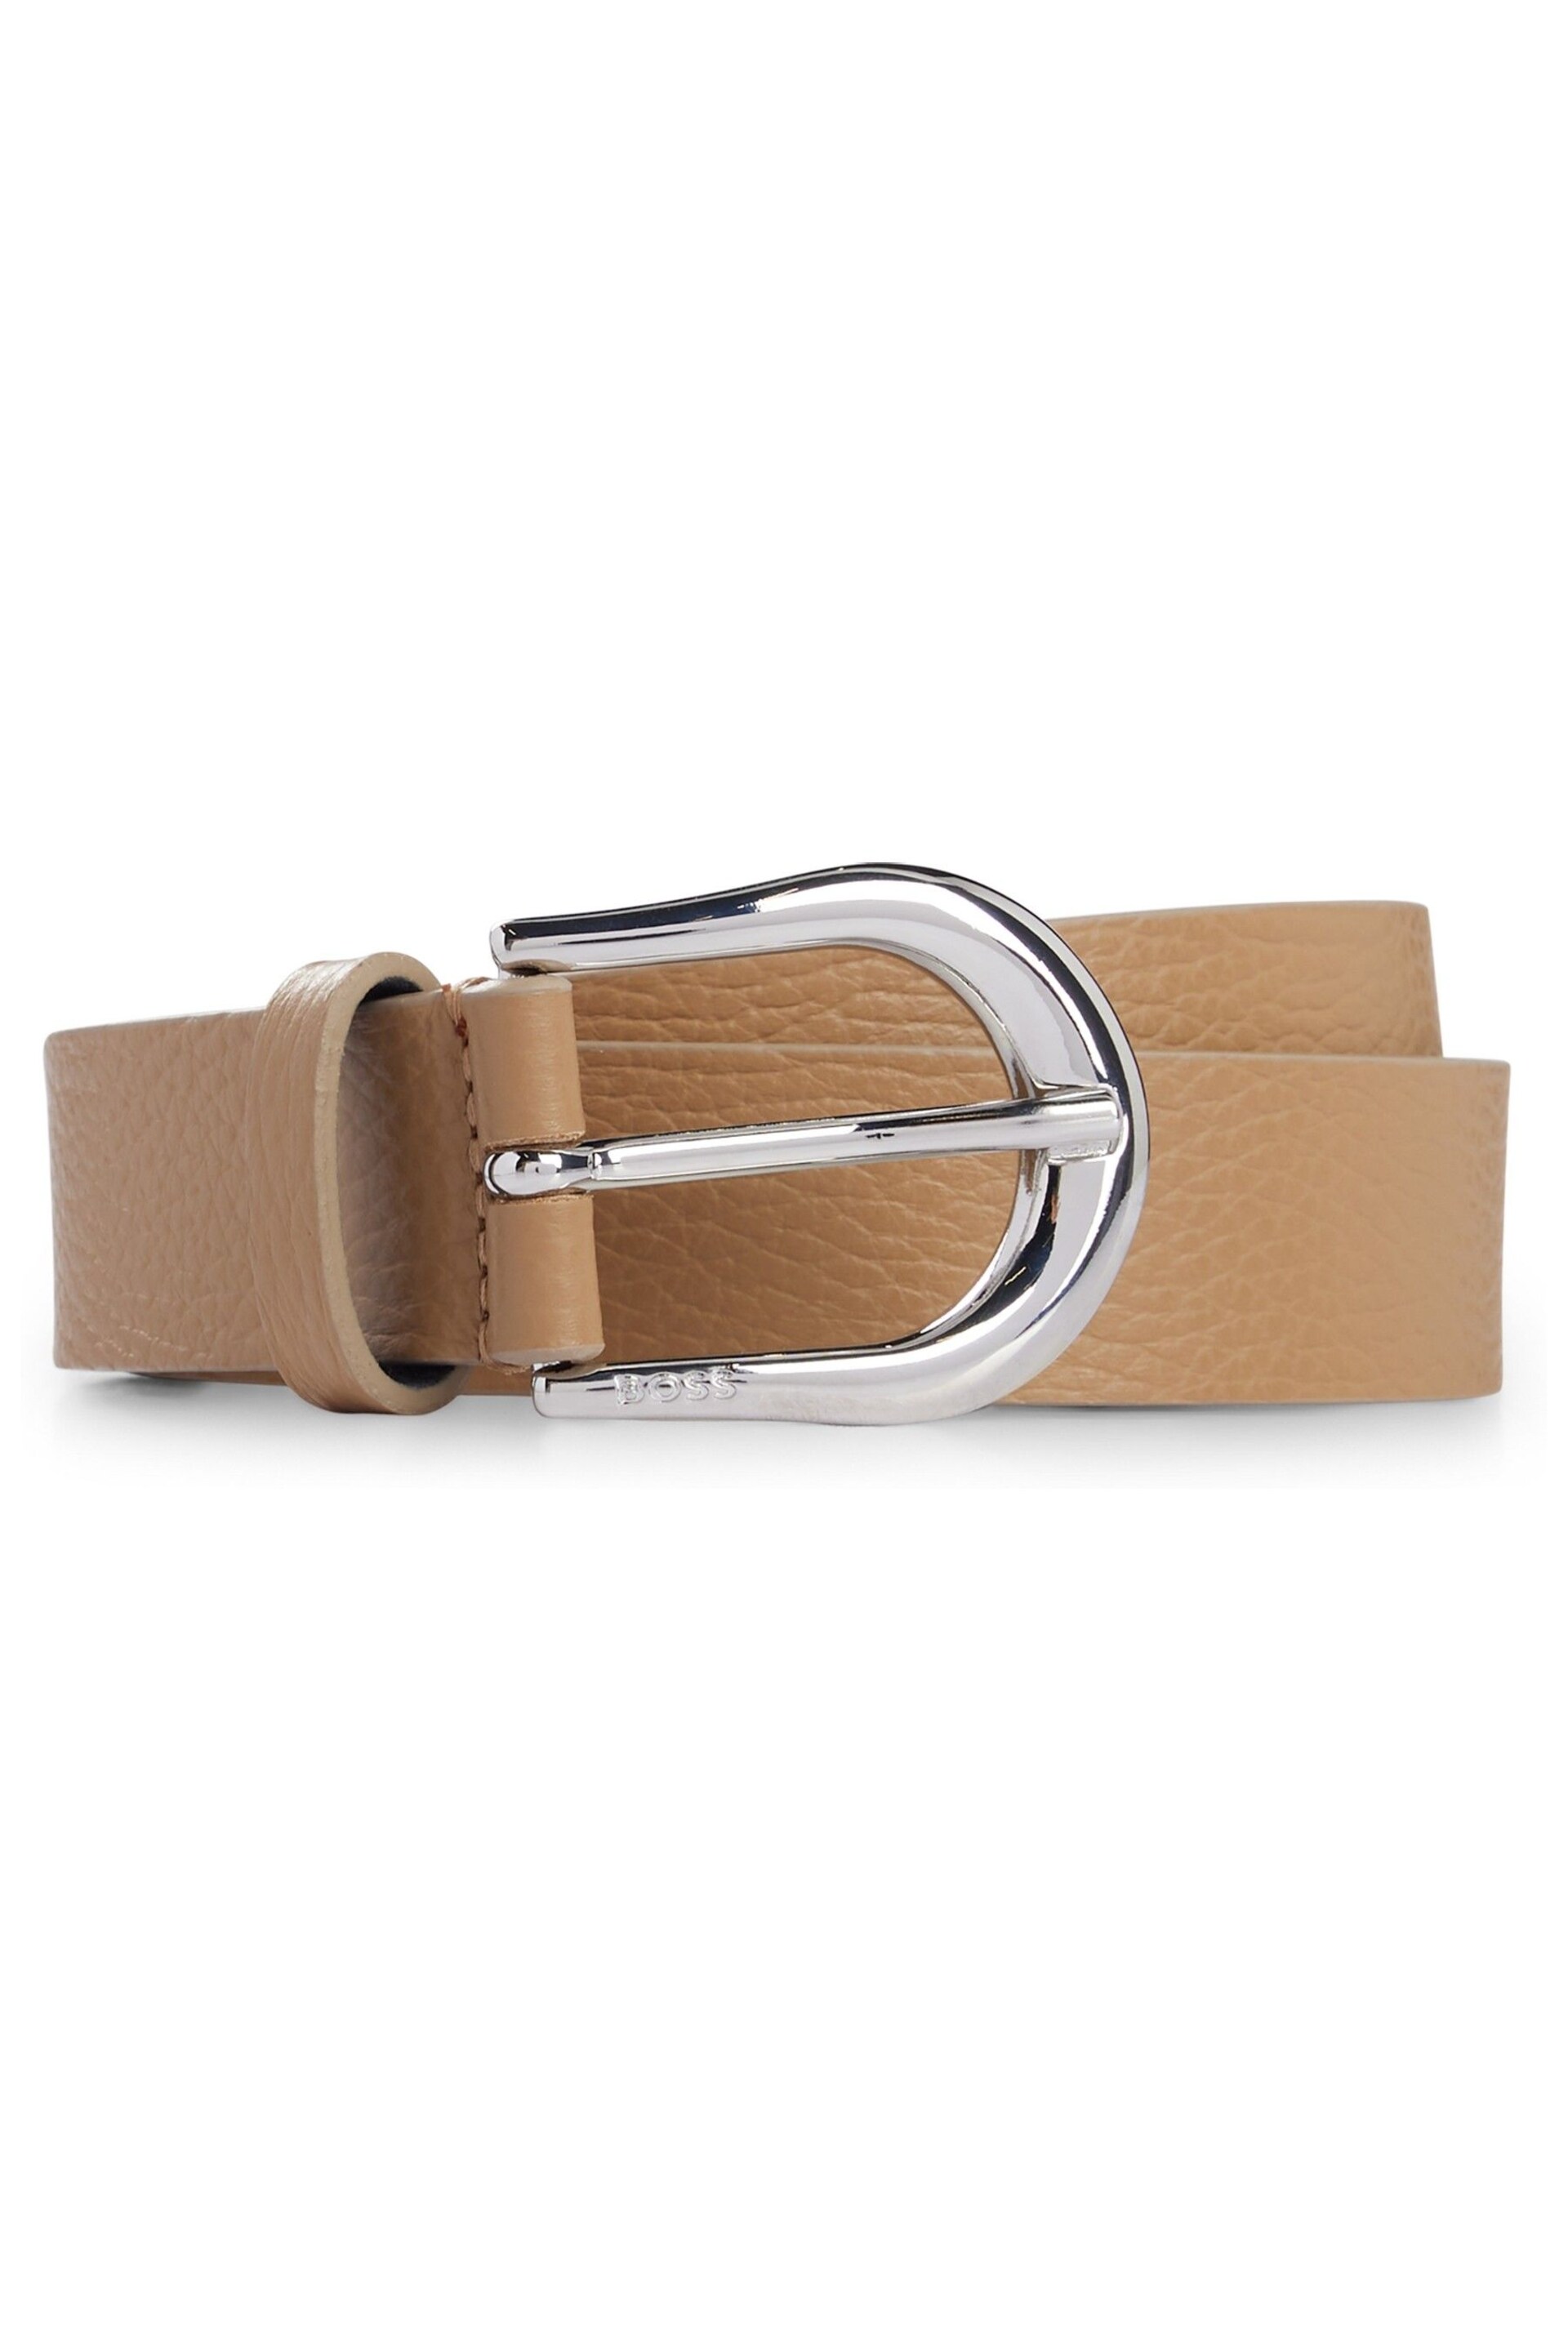 BOSS Natural Italian-Leather Belt With Polished Silver Hardware - Image 1 of 5